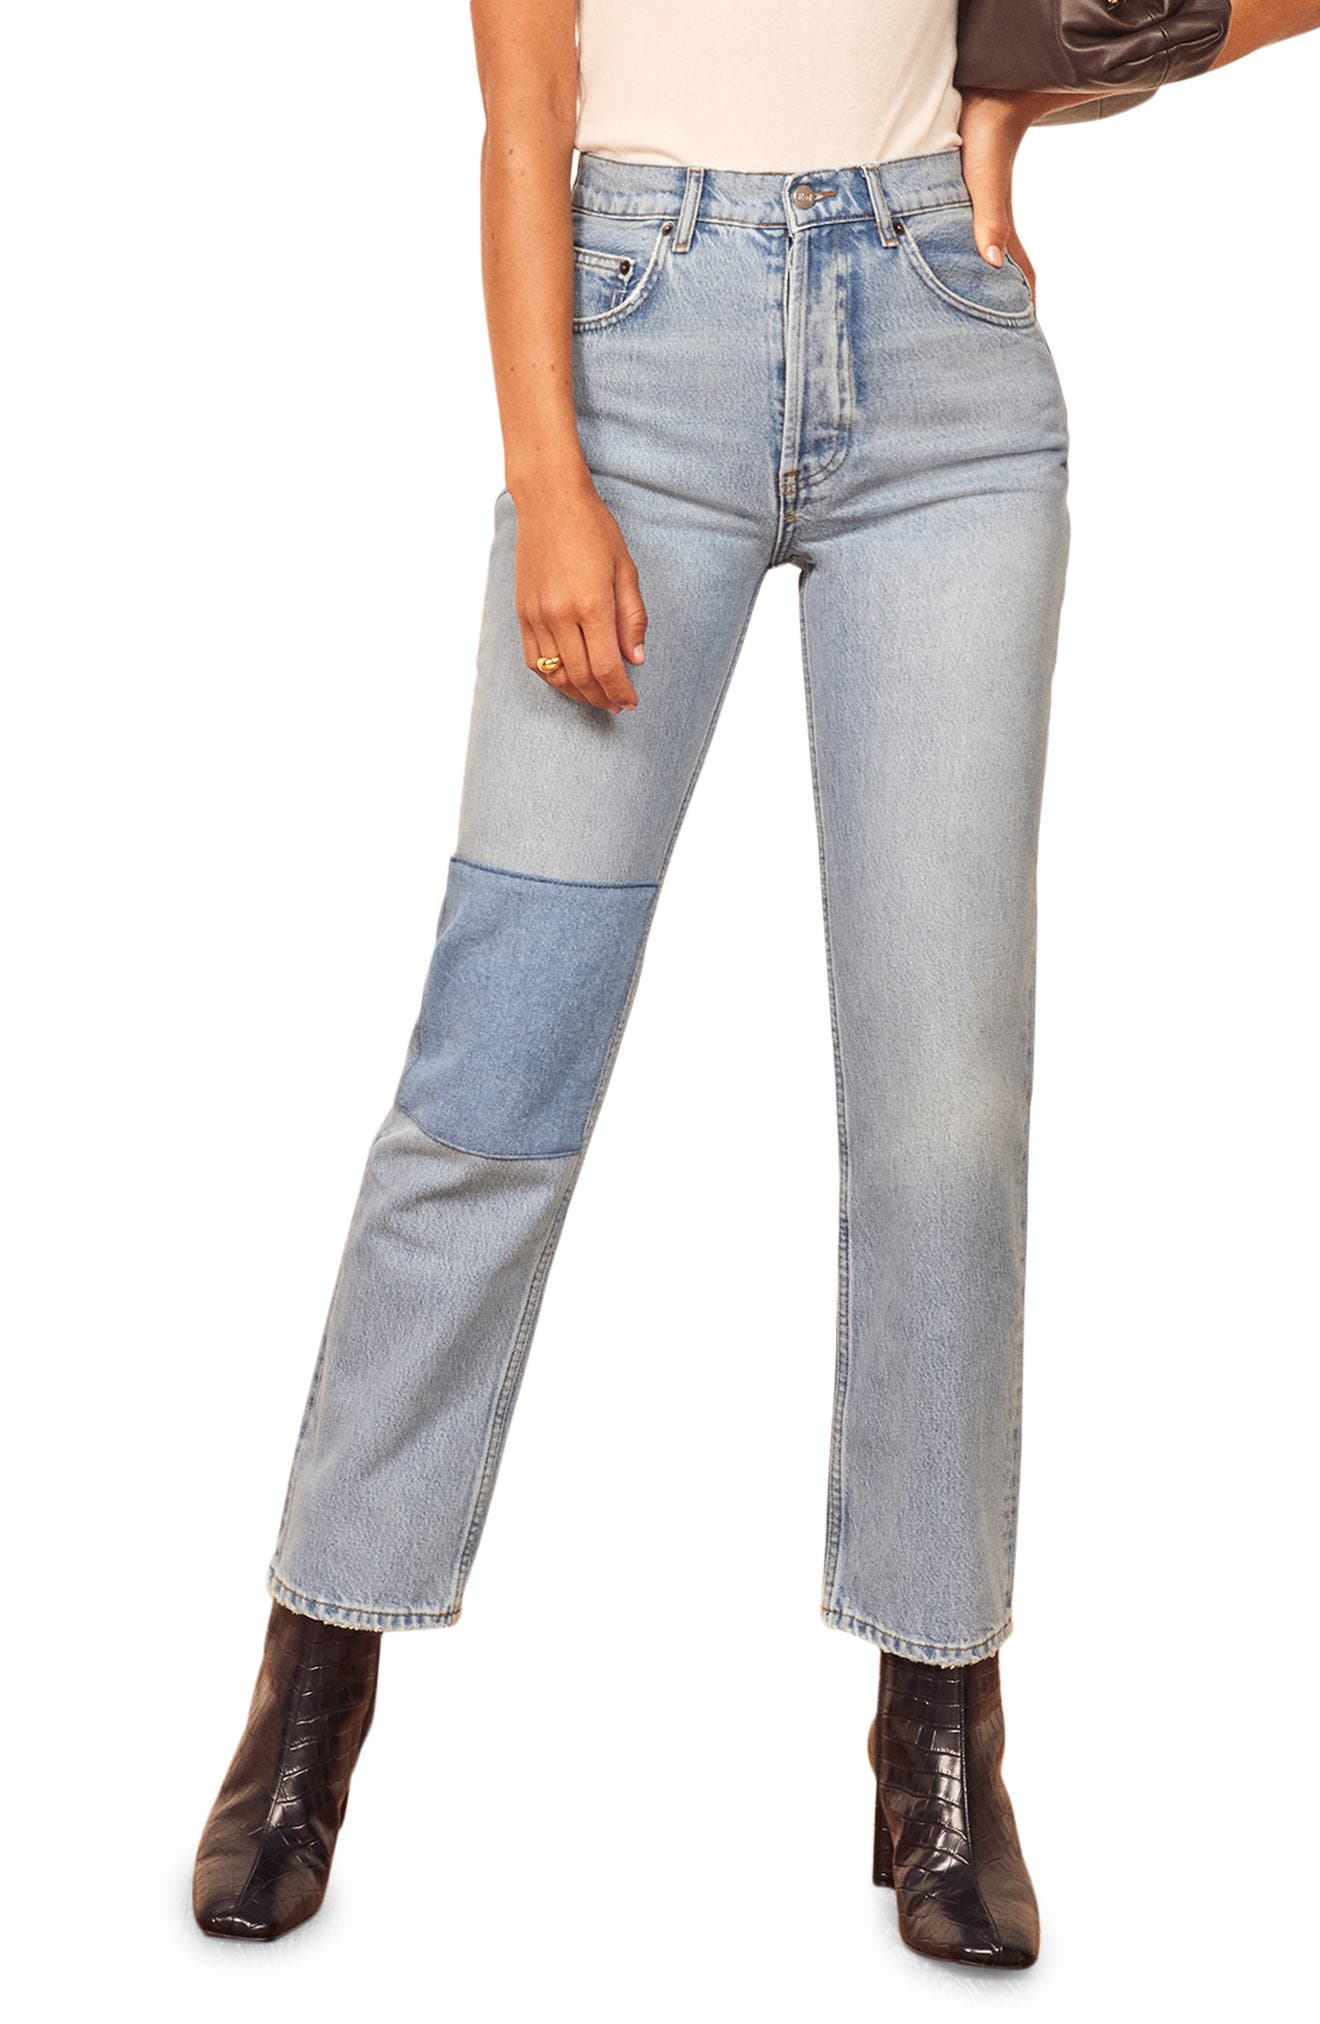 Reformation Cynthia Patch Jeans in Tahoe at Nordstrom, Size 25